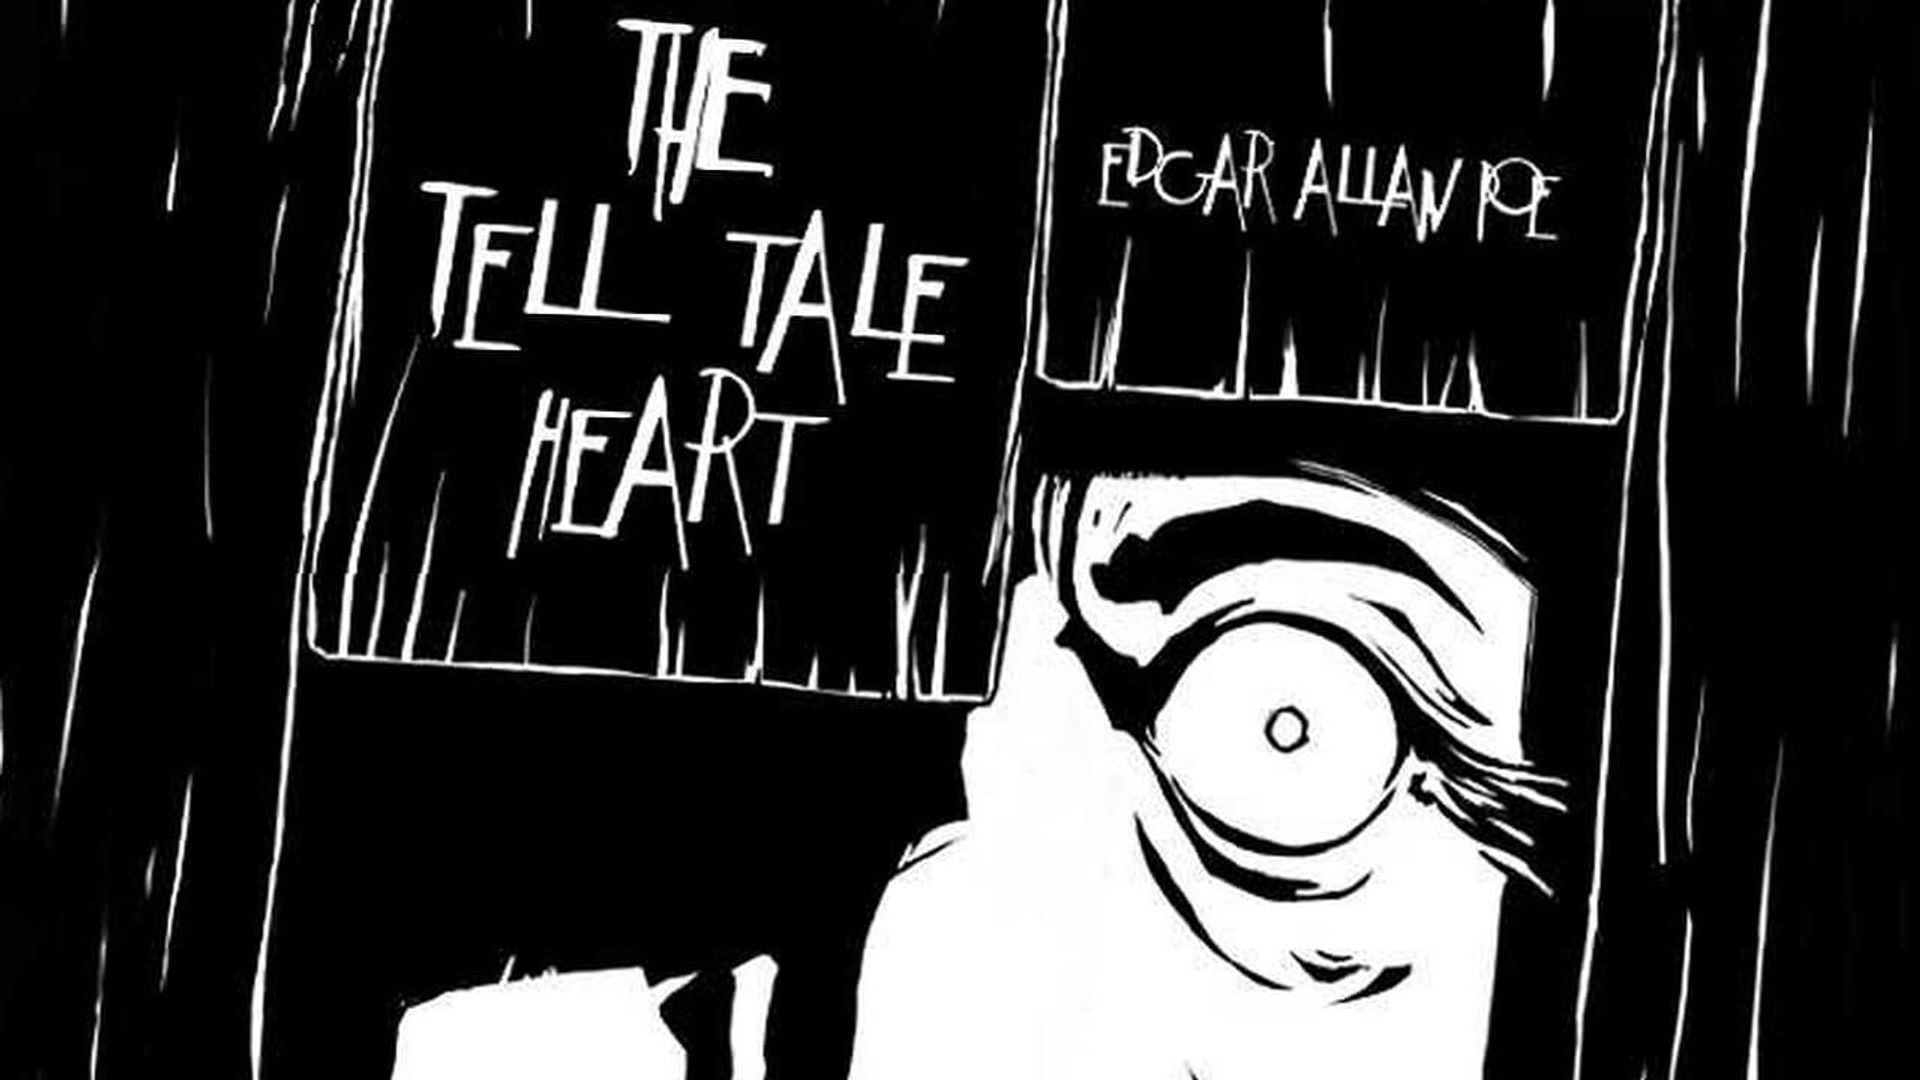 The Tell Tale Heart background